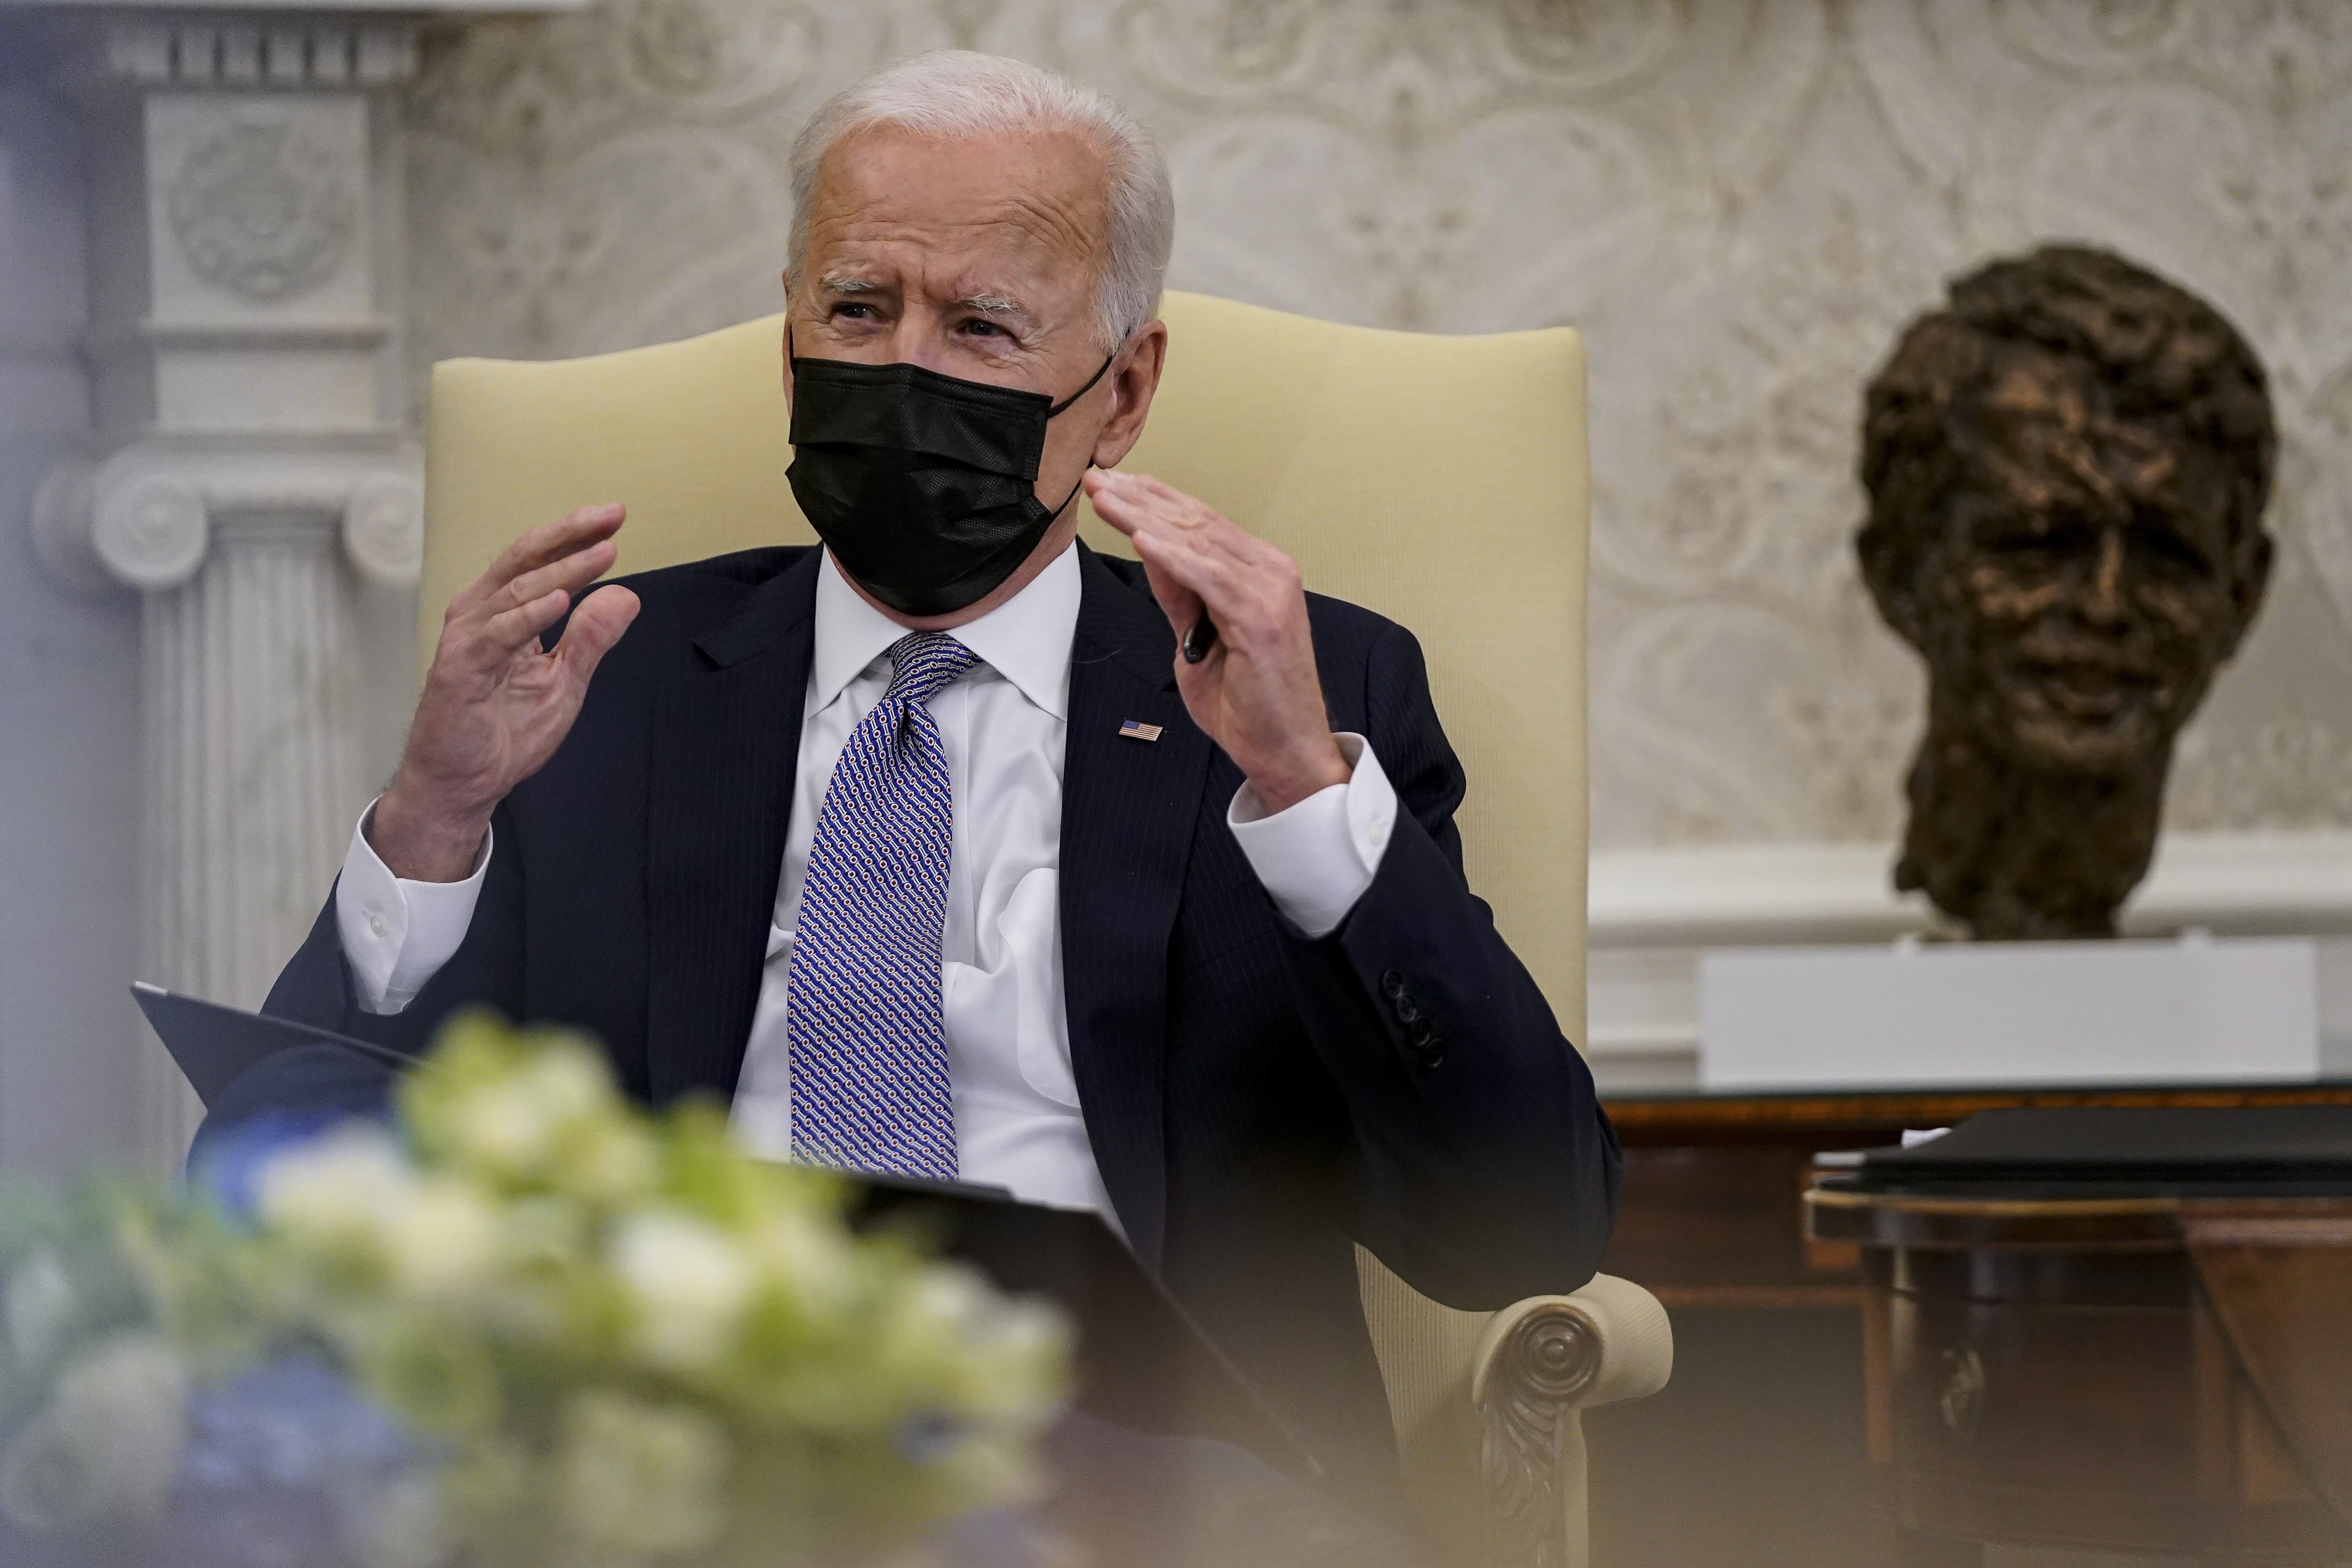 US President Joe Biden says America needs to step up computer chip investment to stay ahead of global rivals. Photo: EPA-EFE